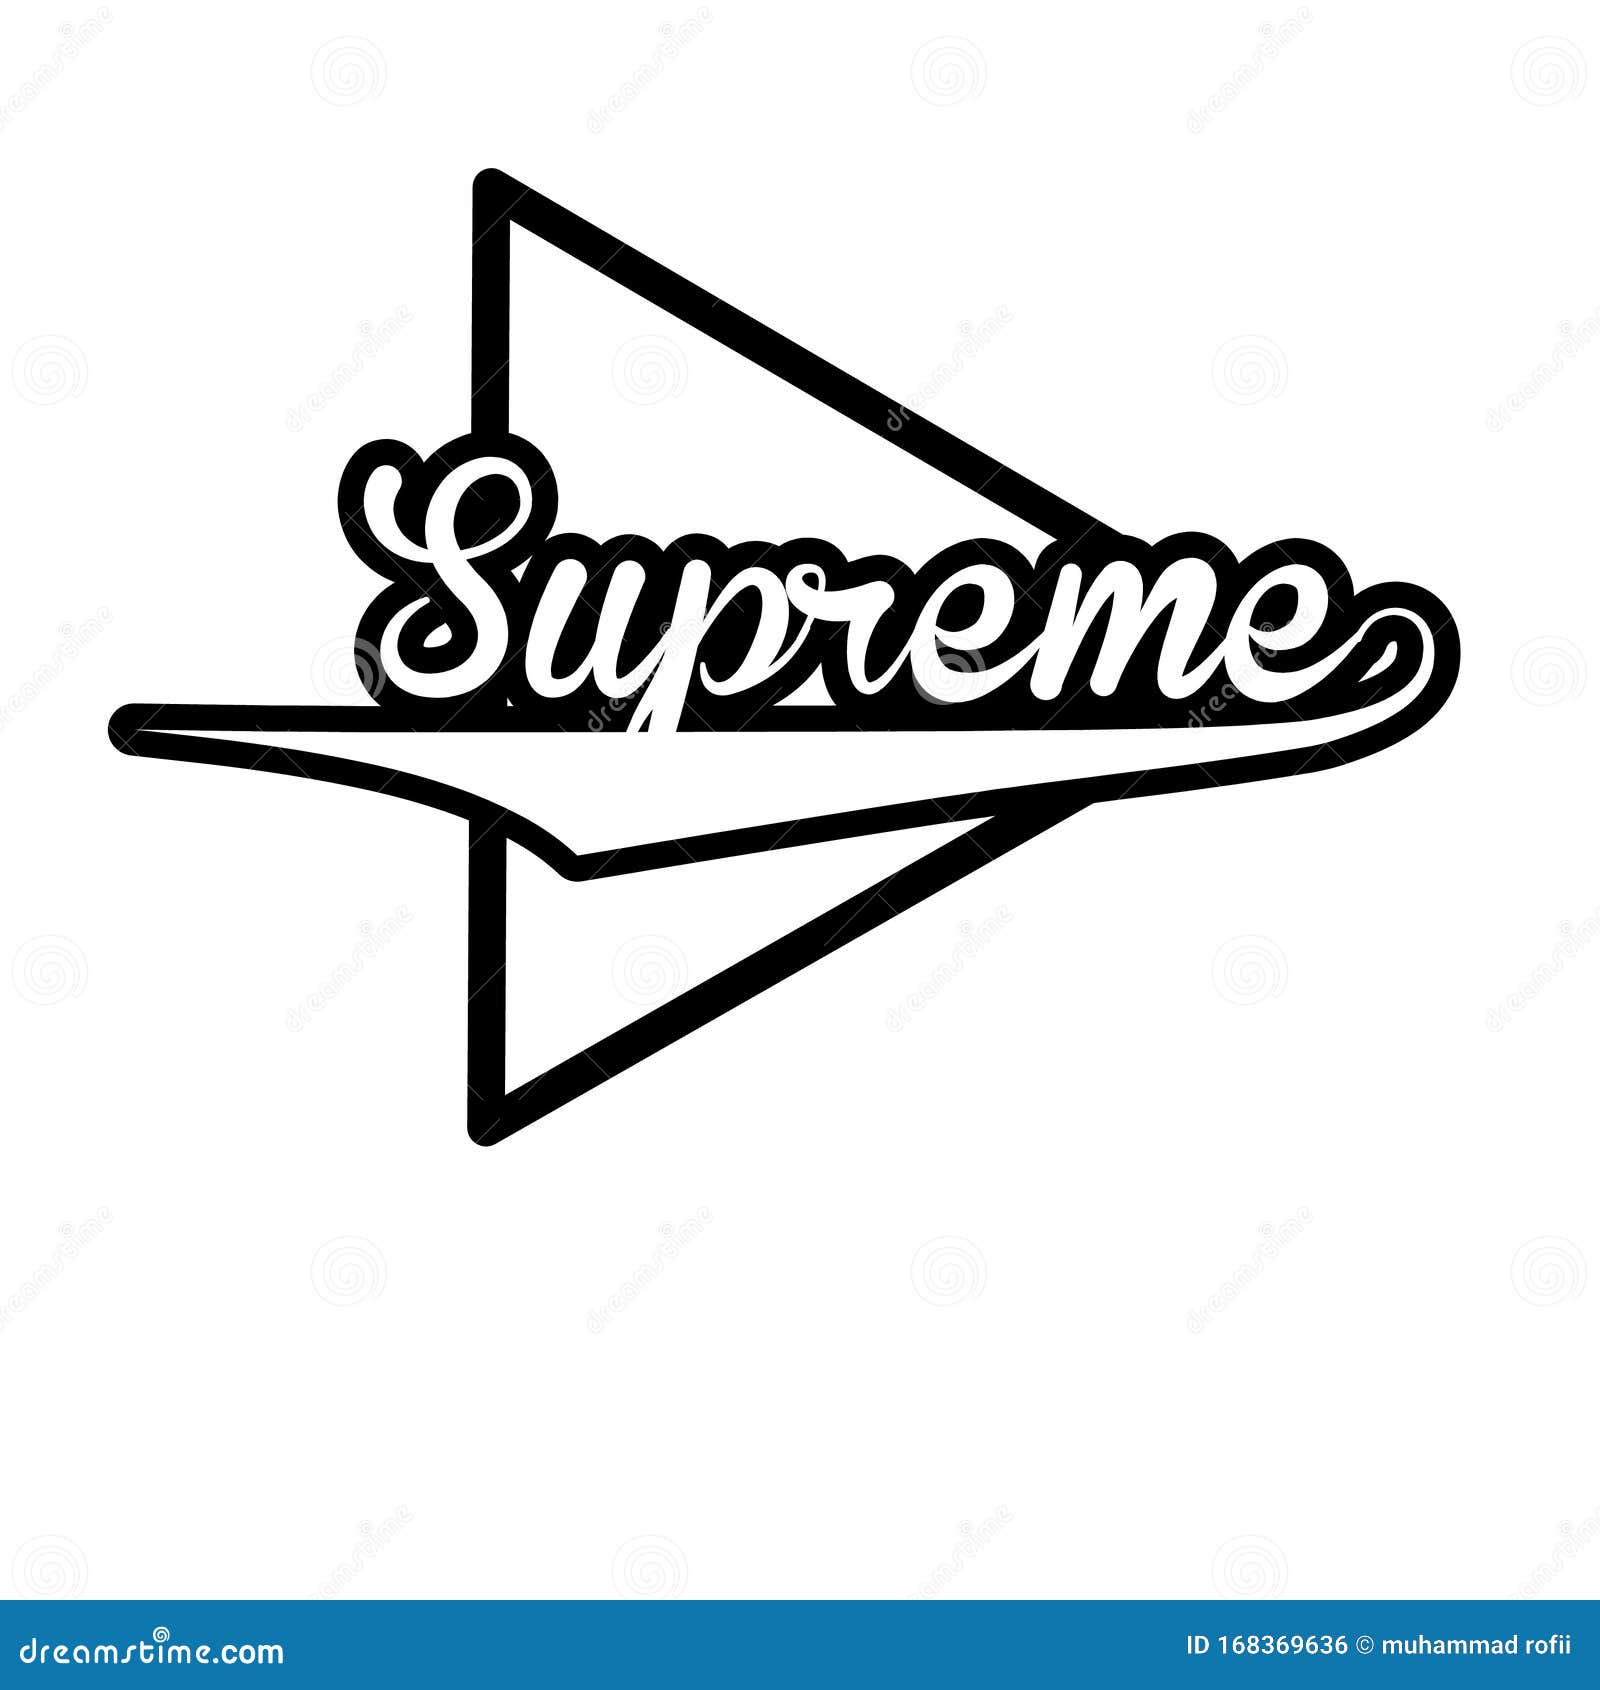 Supreme Logo with a Taper Triangle for T-shirt Screen Printing or Logo